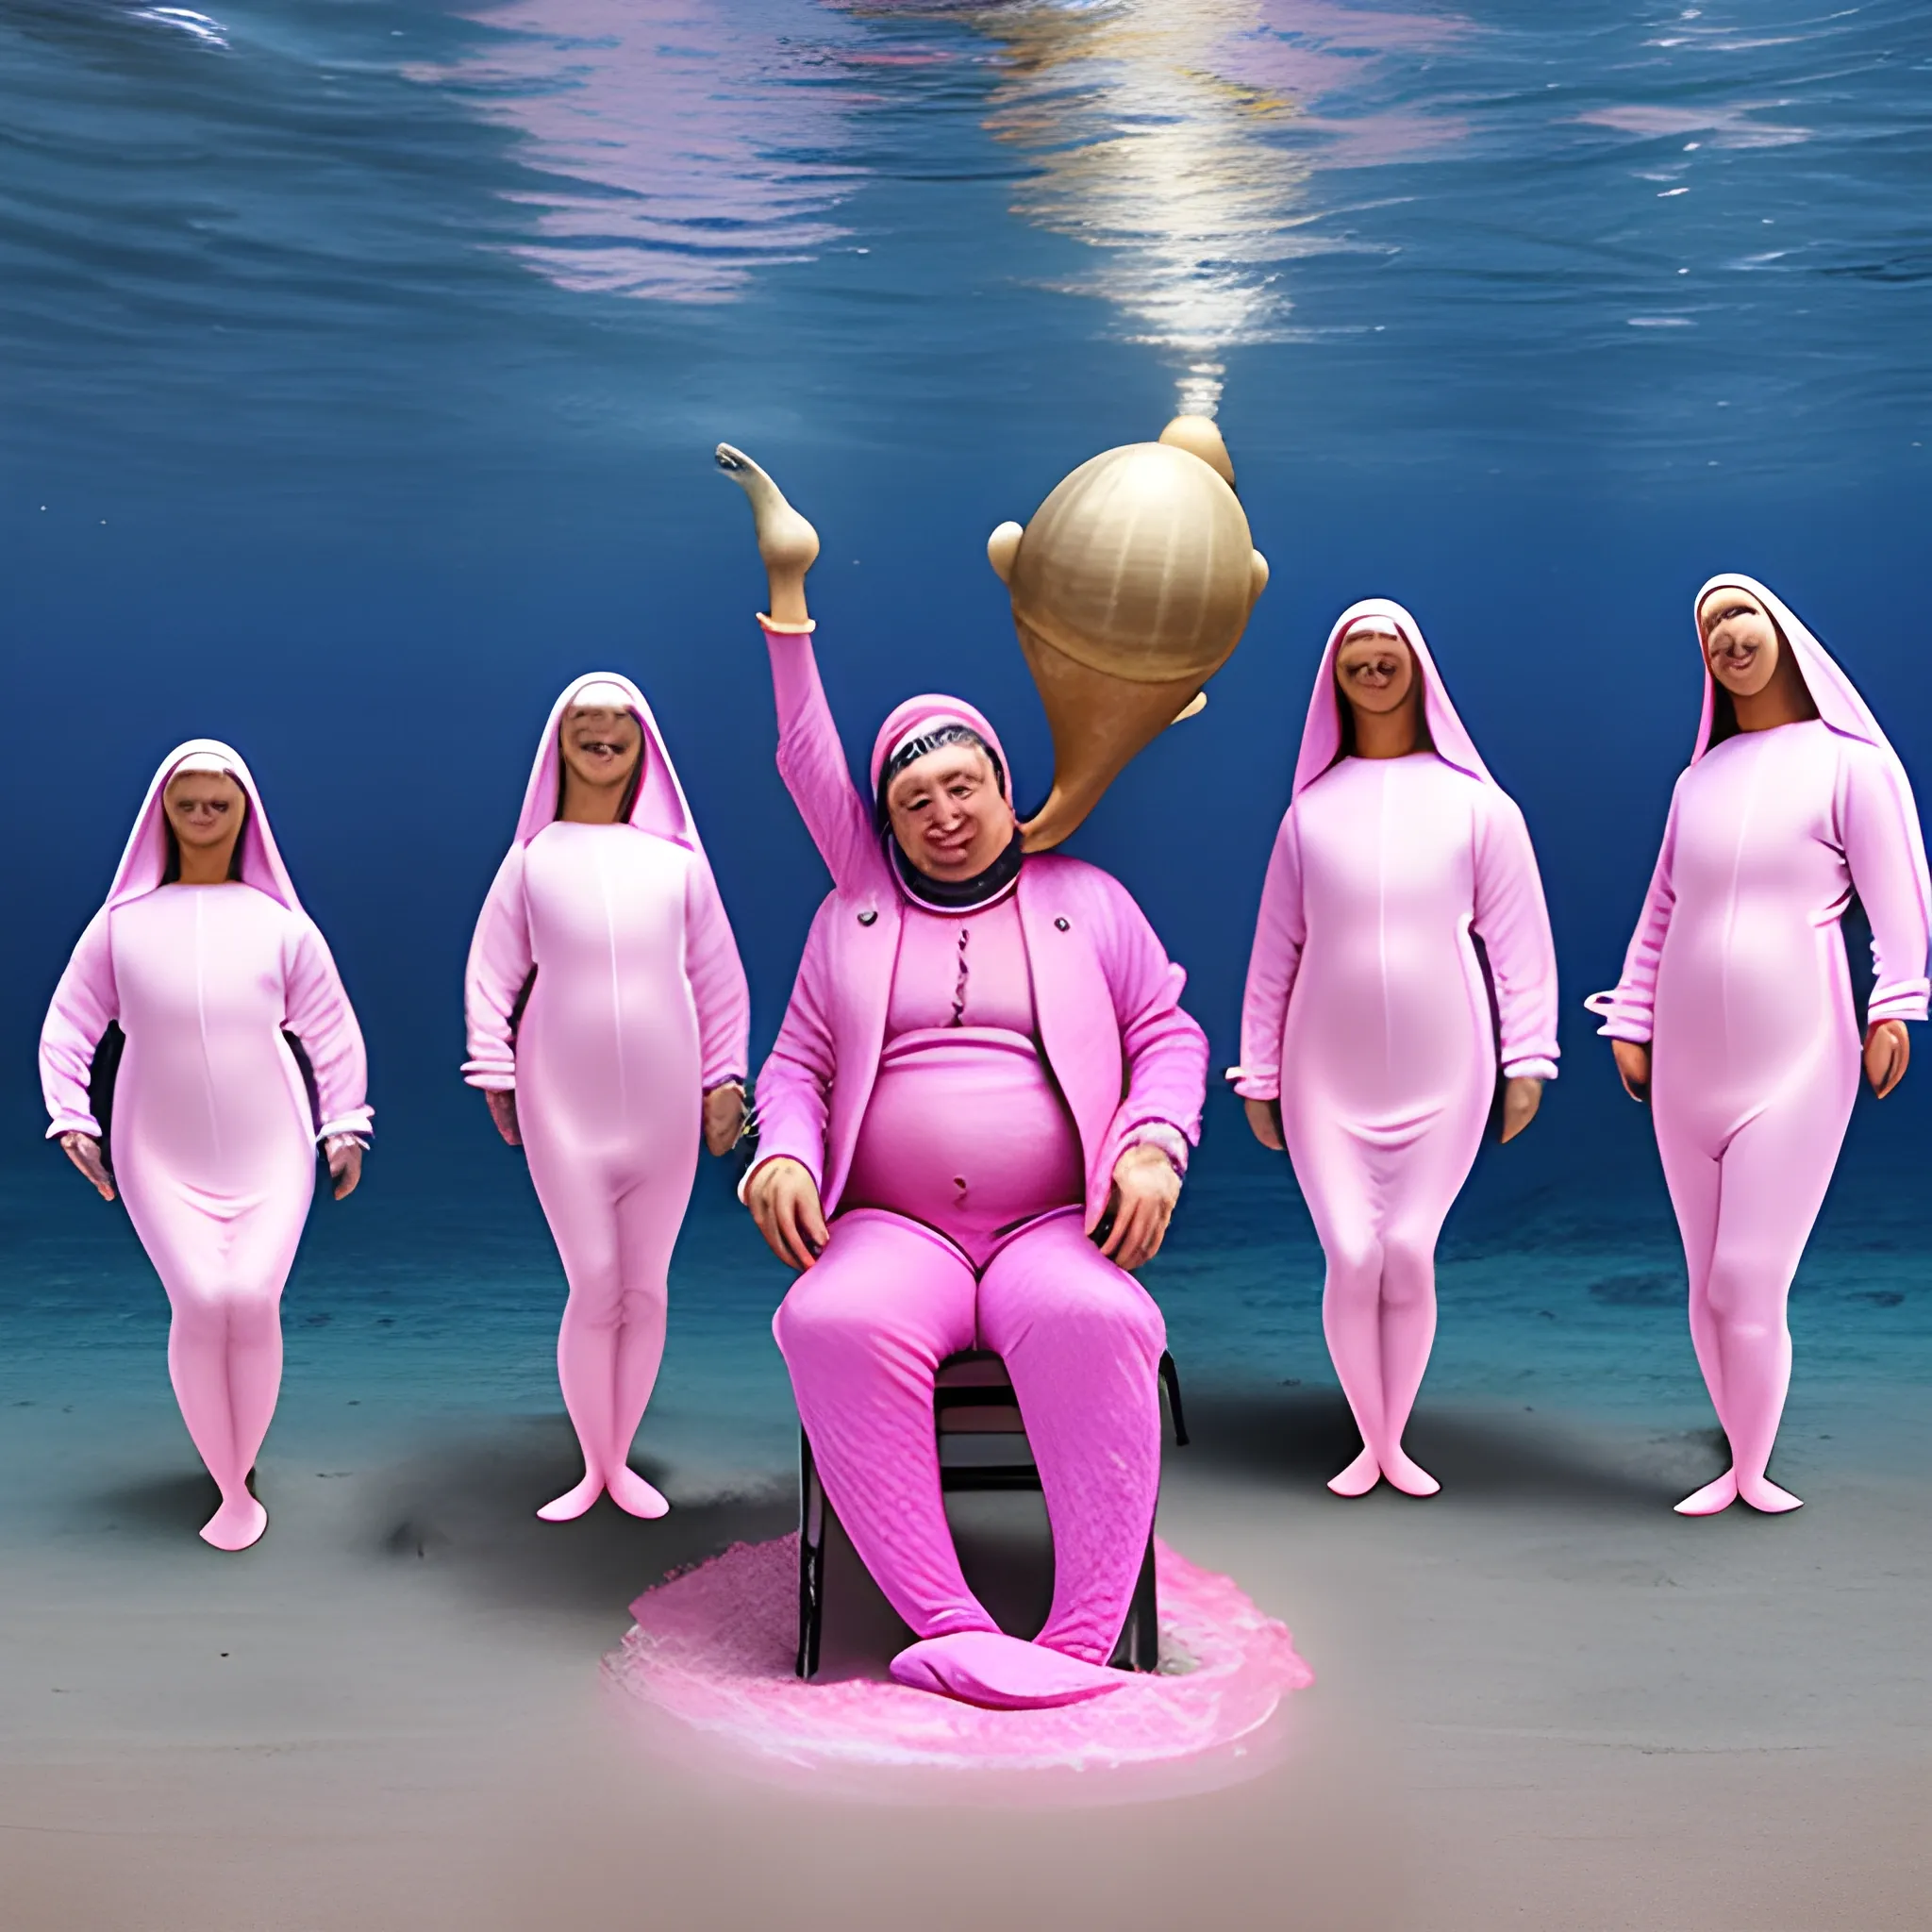 tall man with dwarfism in mermaid suit, nuns in pink suits, space